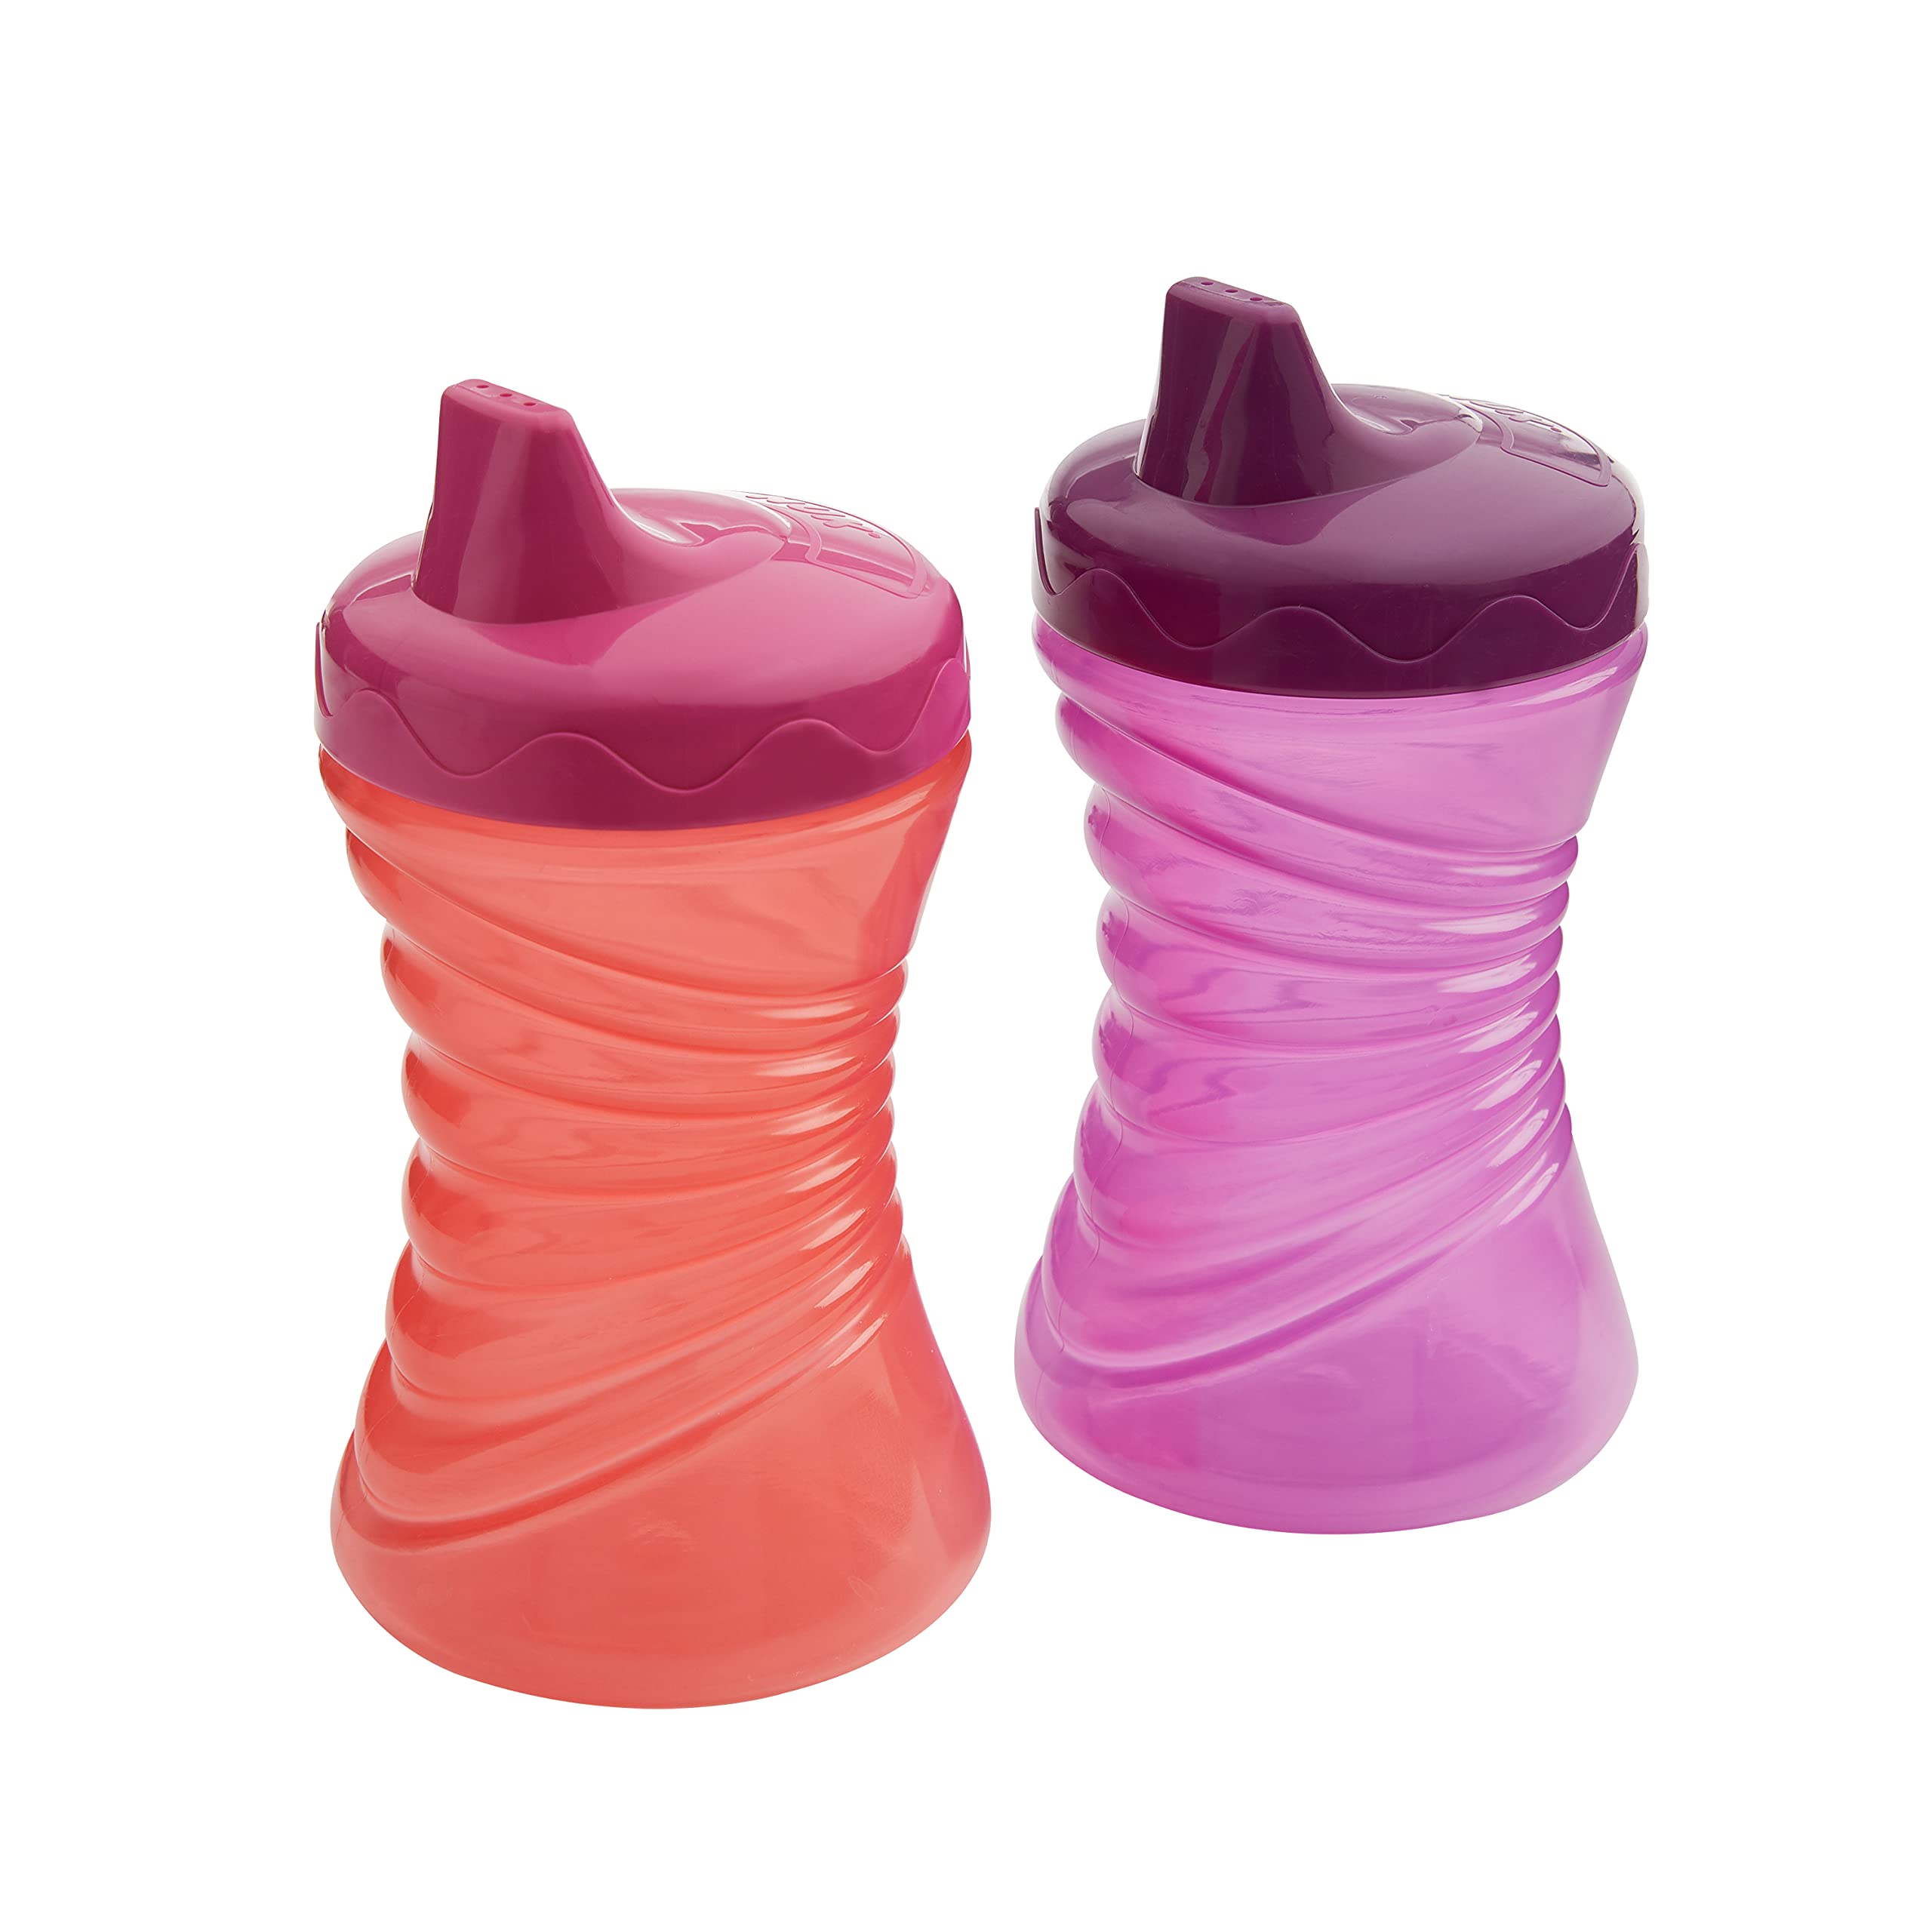 Mighty Grip® Sippy Cup